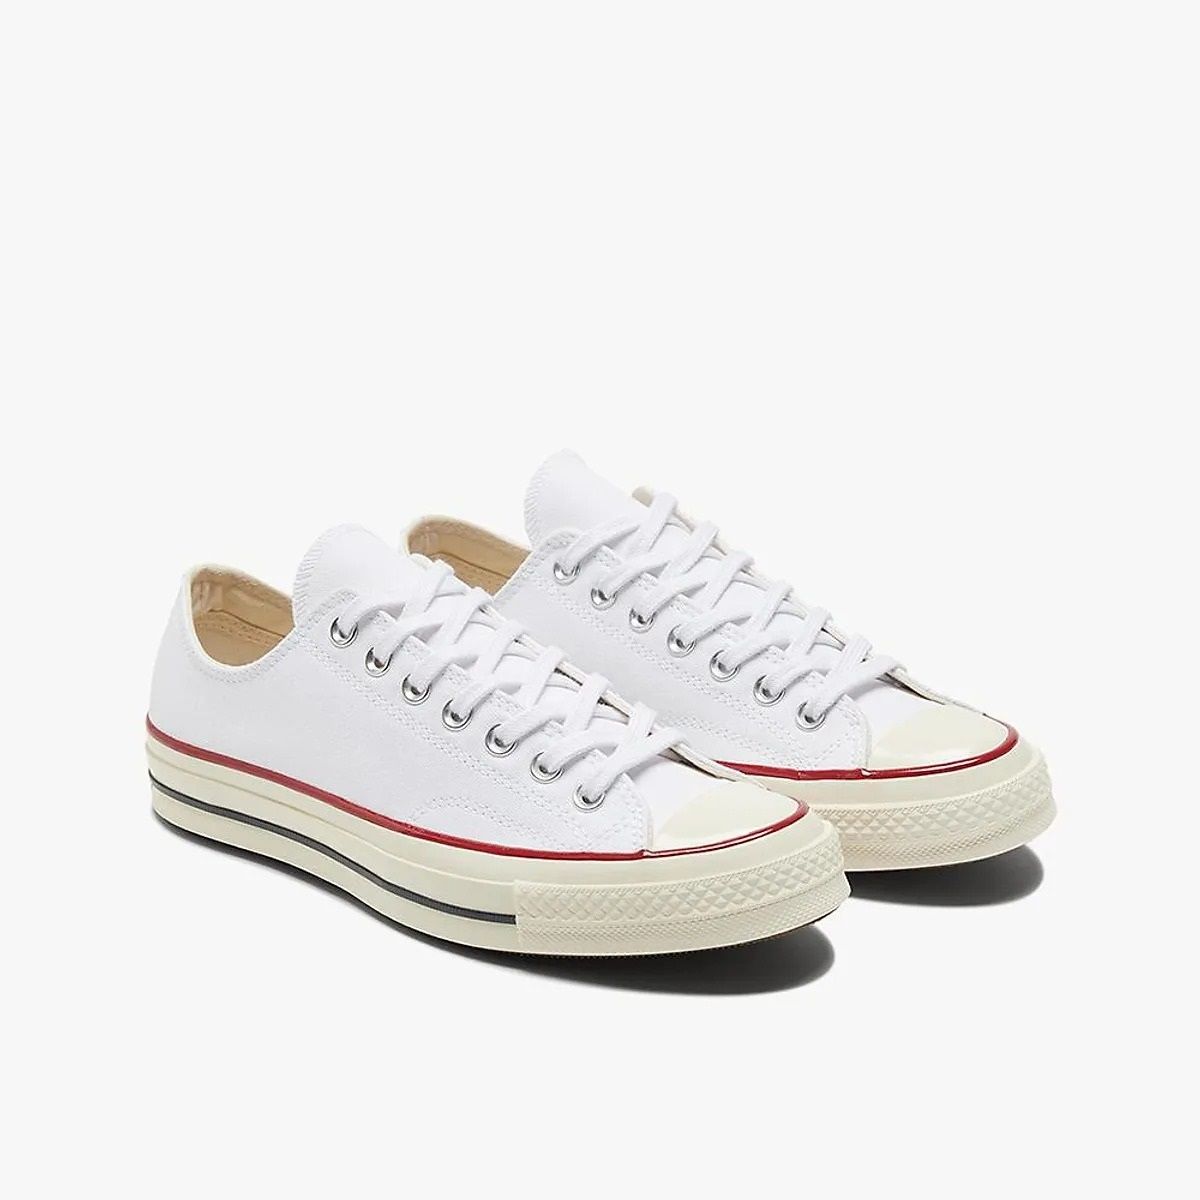  Giày Thể Thao Unisex CONVERSE Chuck Taylor All Star 1970S Low White 162065C 